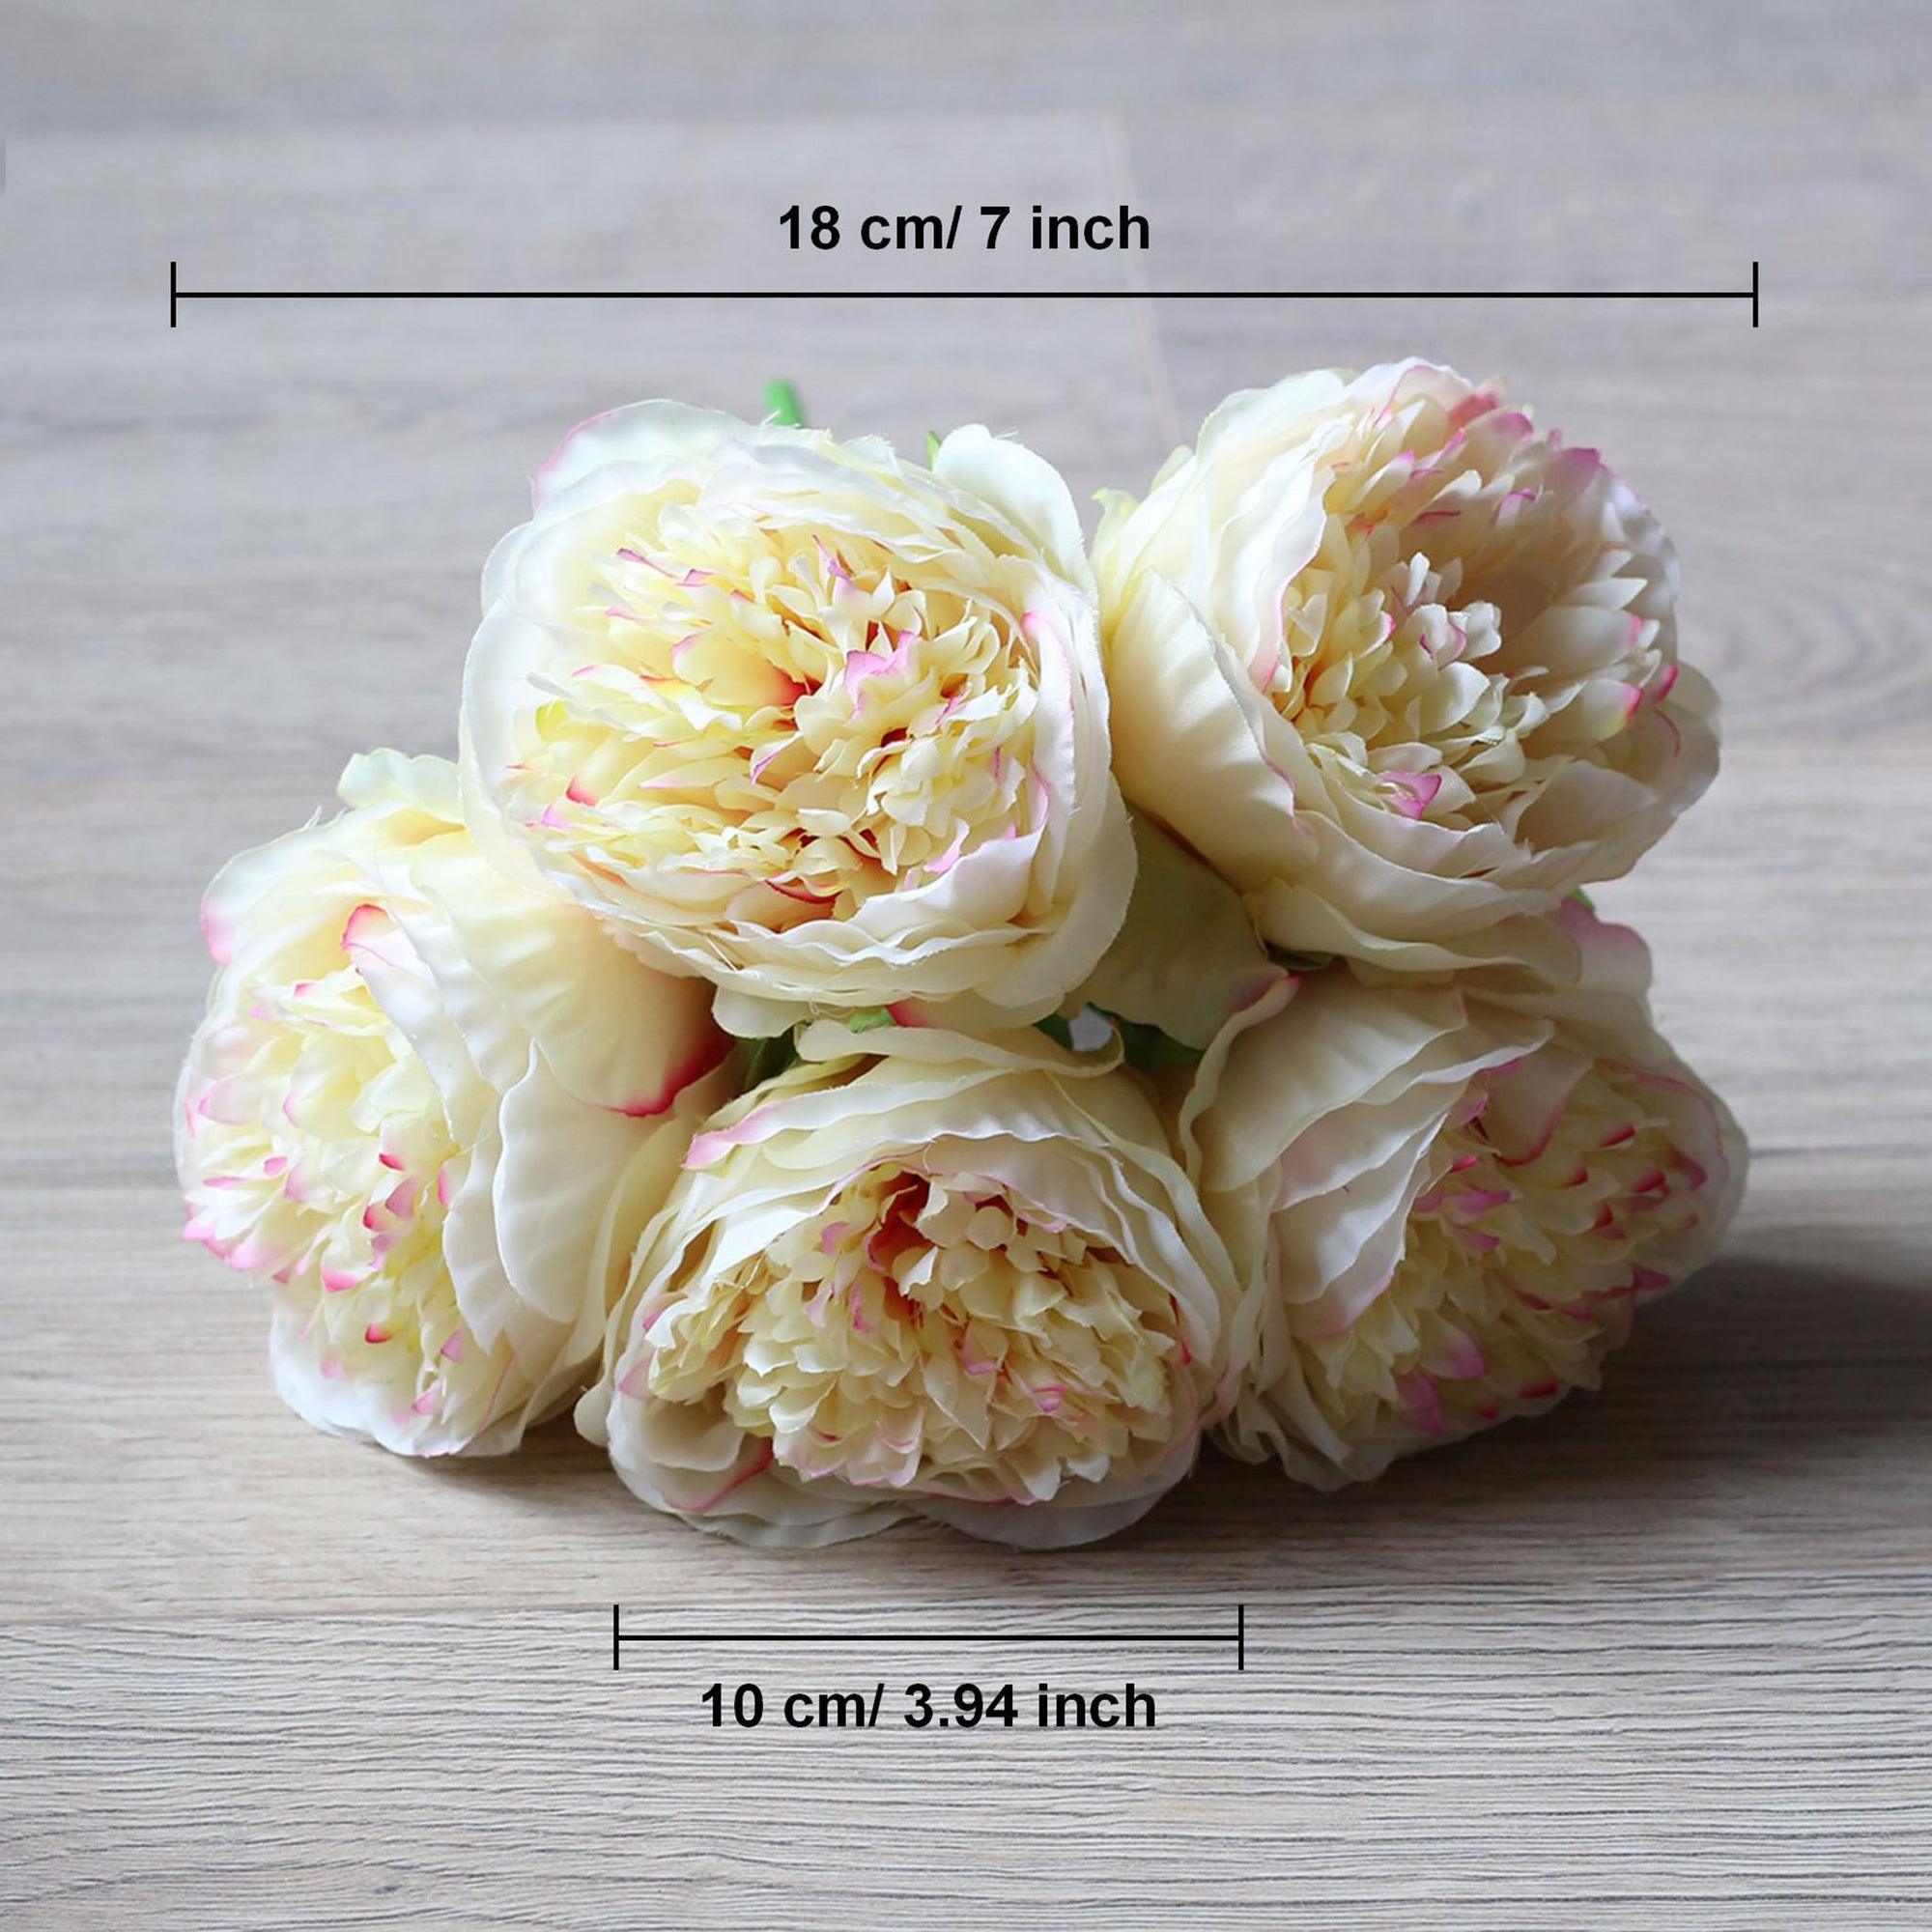 Champagne Silk Peony Bouquet Quality Wedding Flowers 5 Heads Peonies Crafts